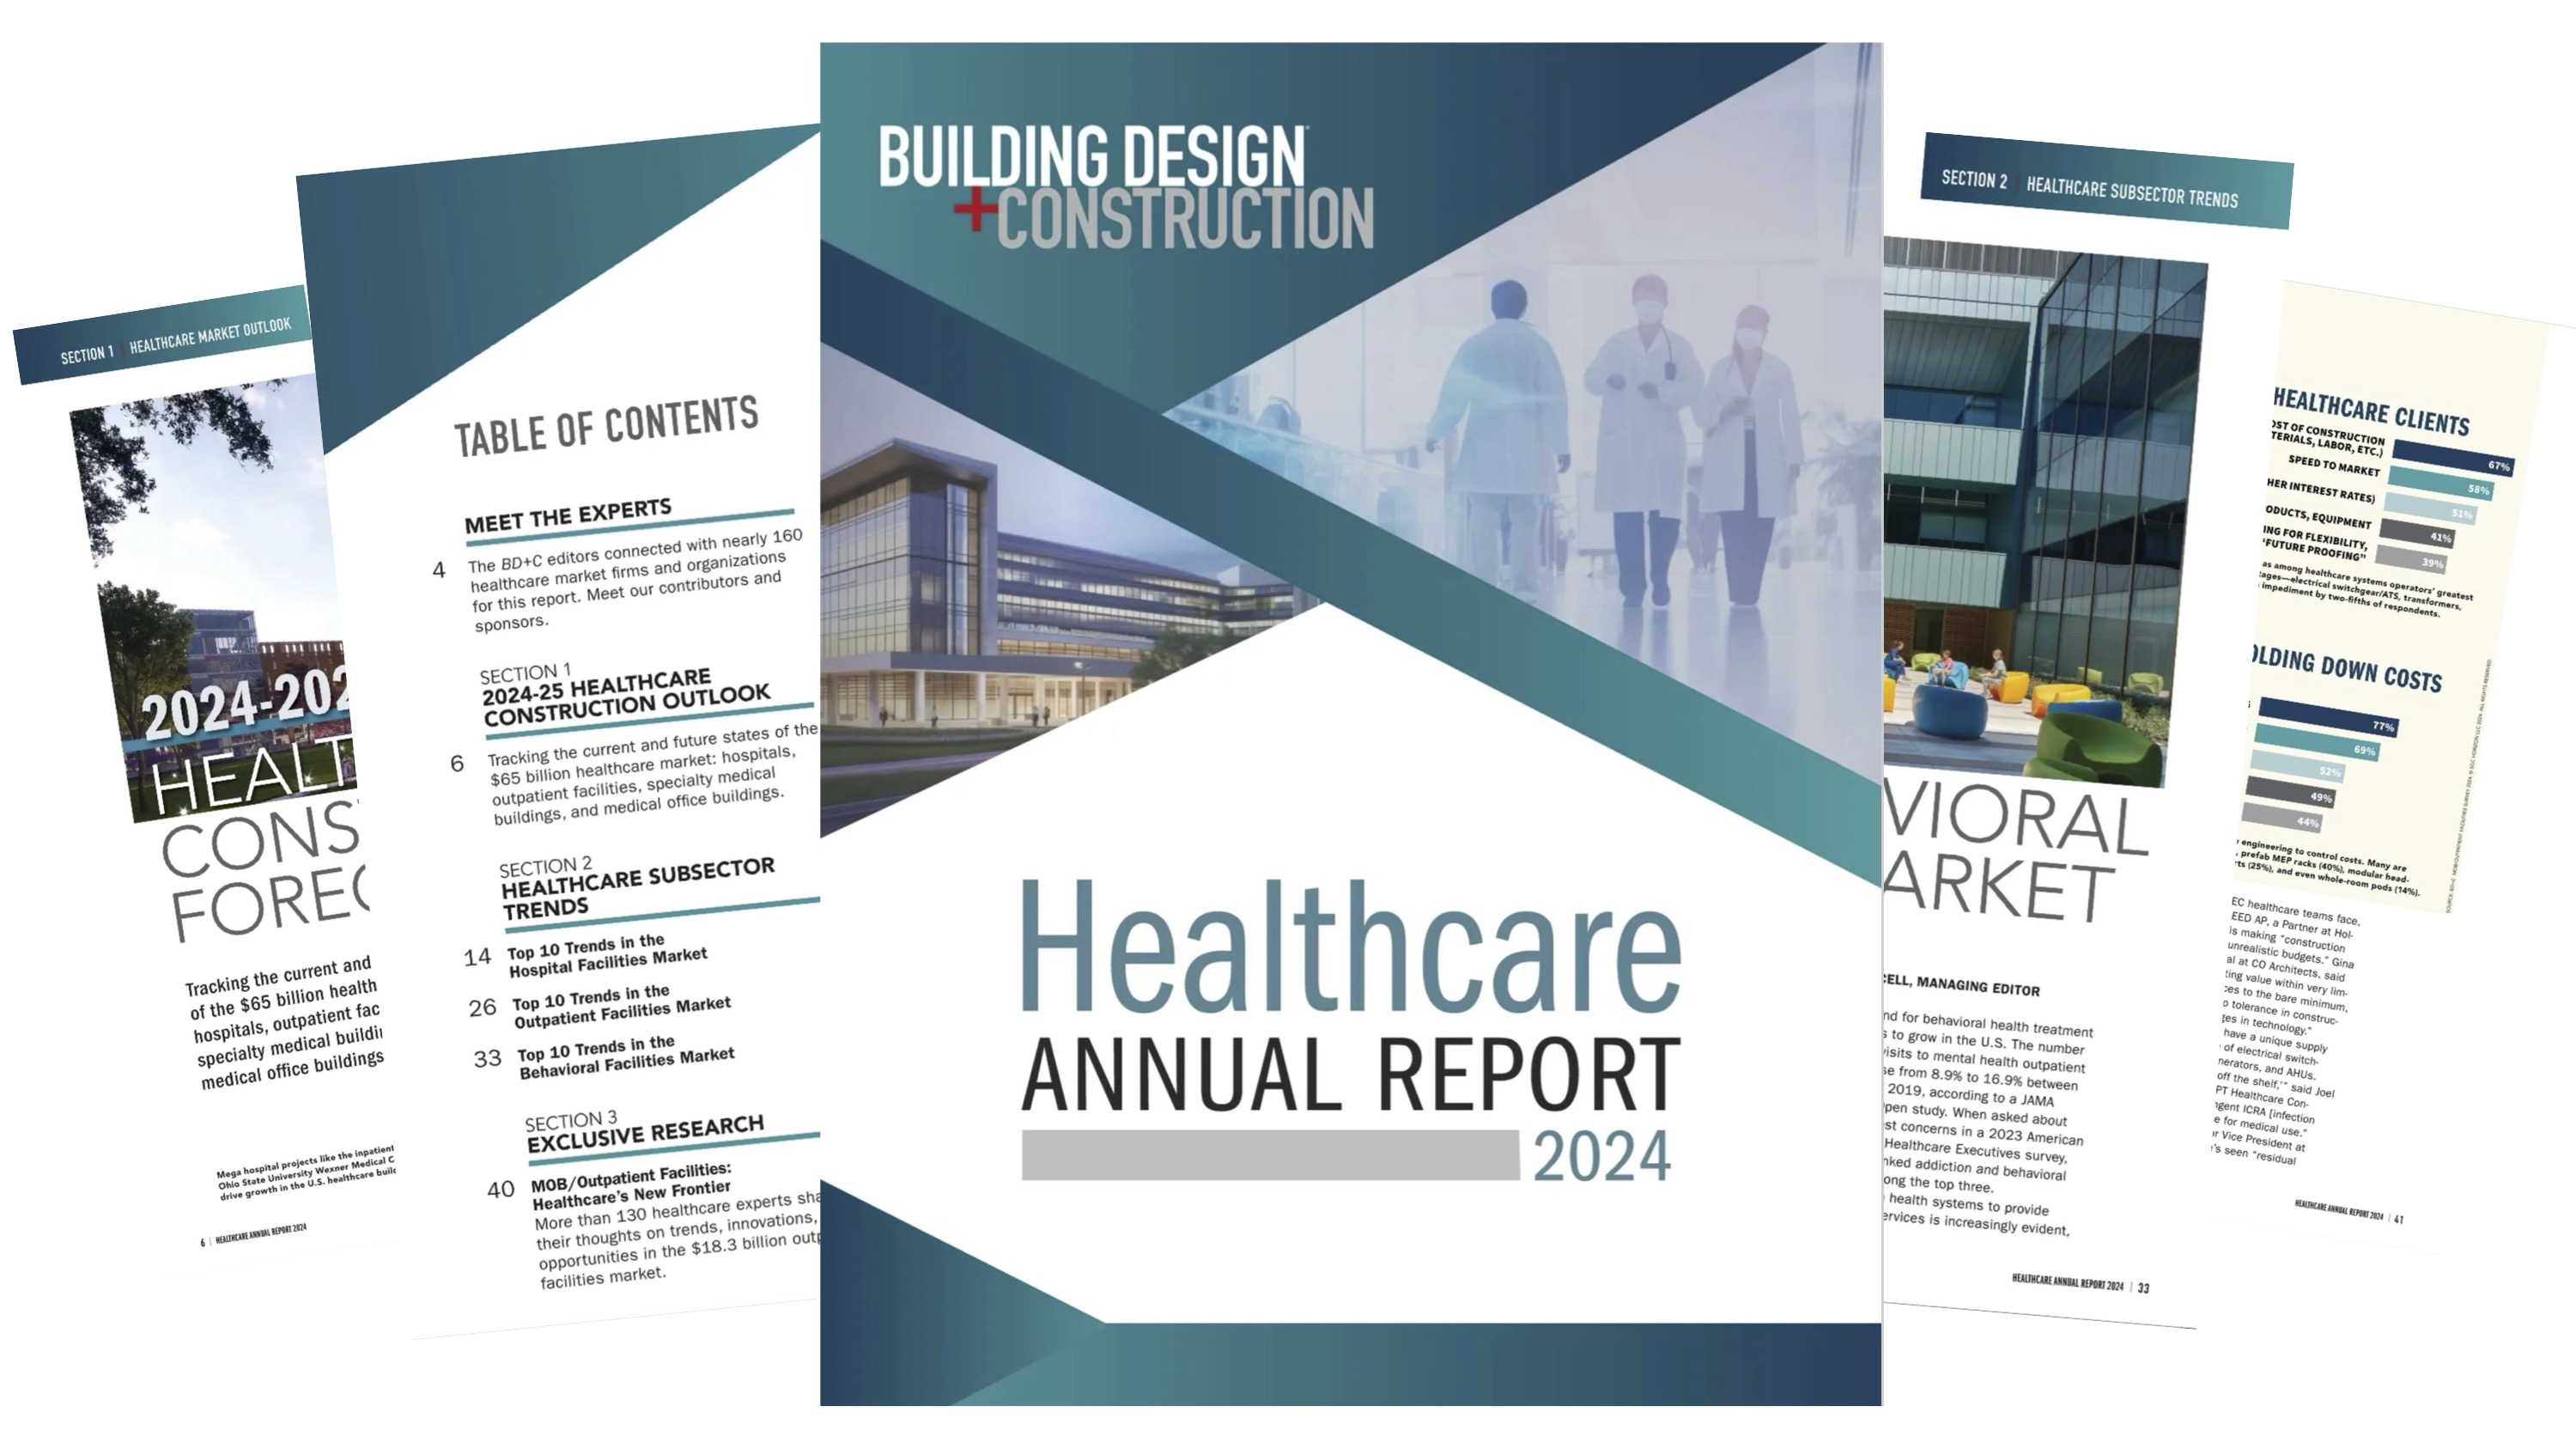 New download: BD+C's 2024 Healthcare Annual Report - Trends and Innovations in Hospitals, Outpatient Facilities, and Behavioral Health Centers